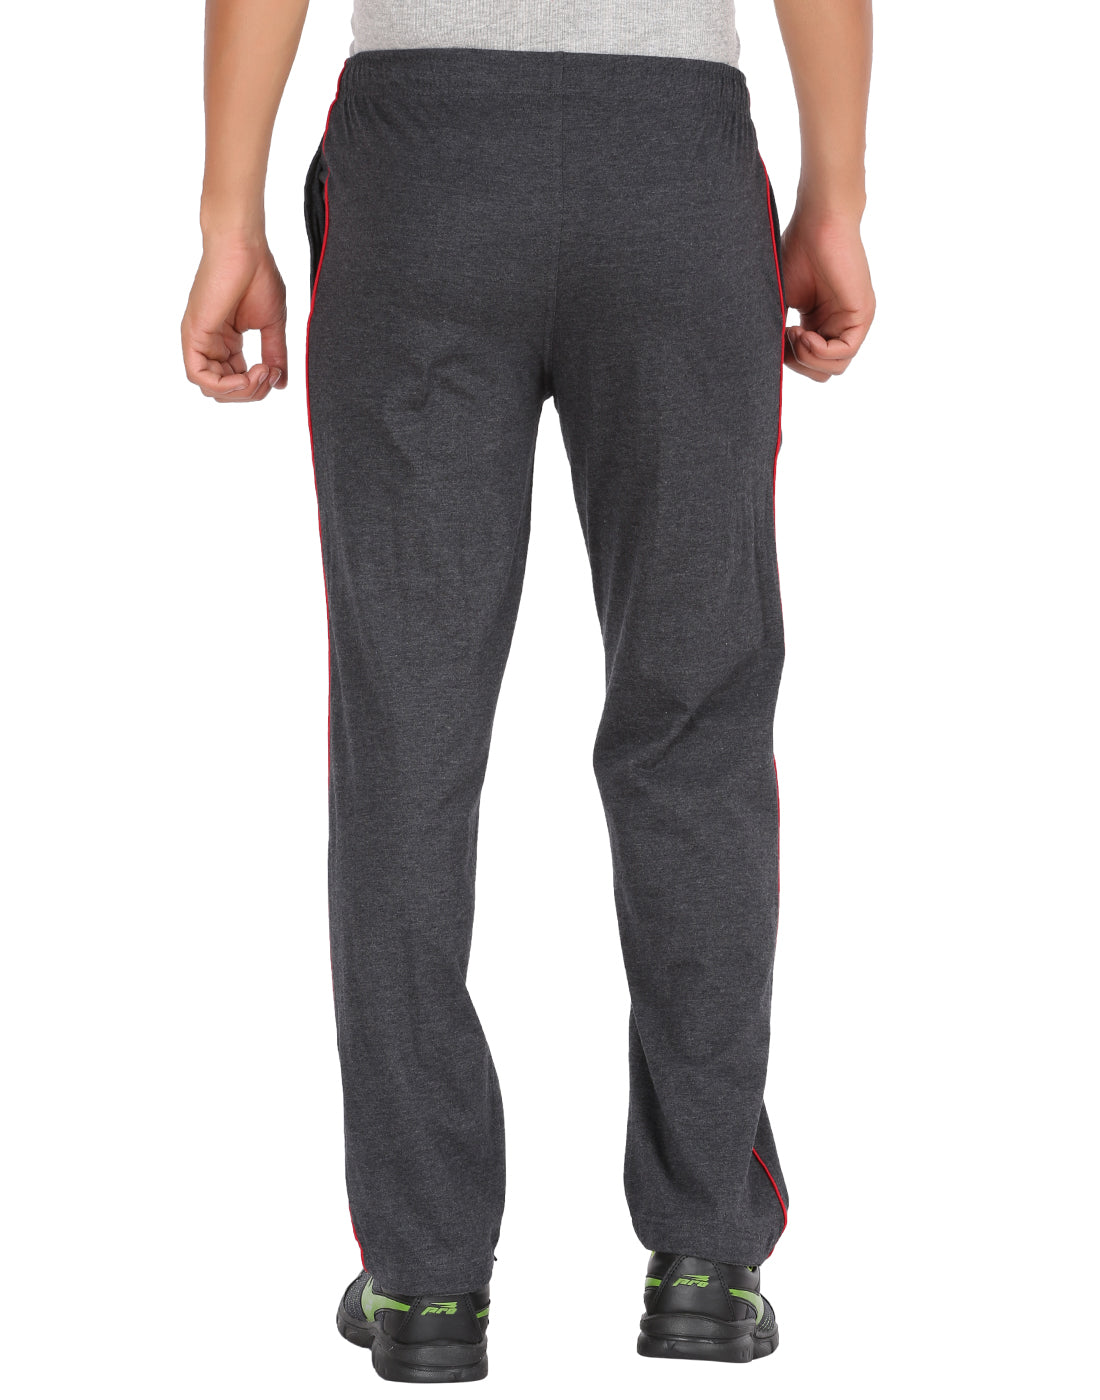 Charcoal Melange Piping Track Pant -Style #0405